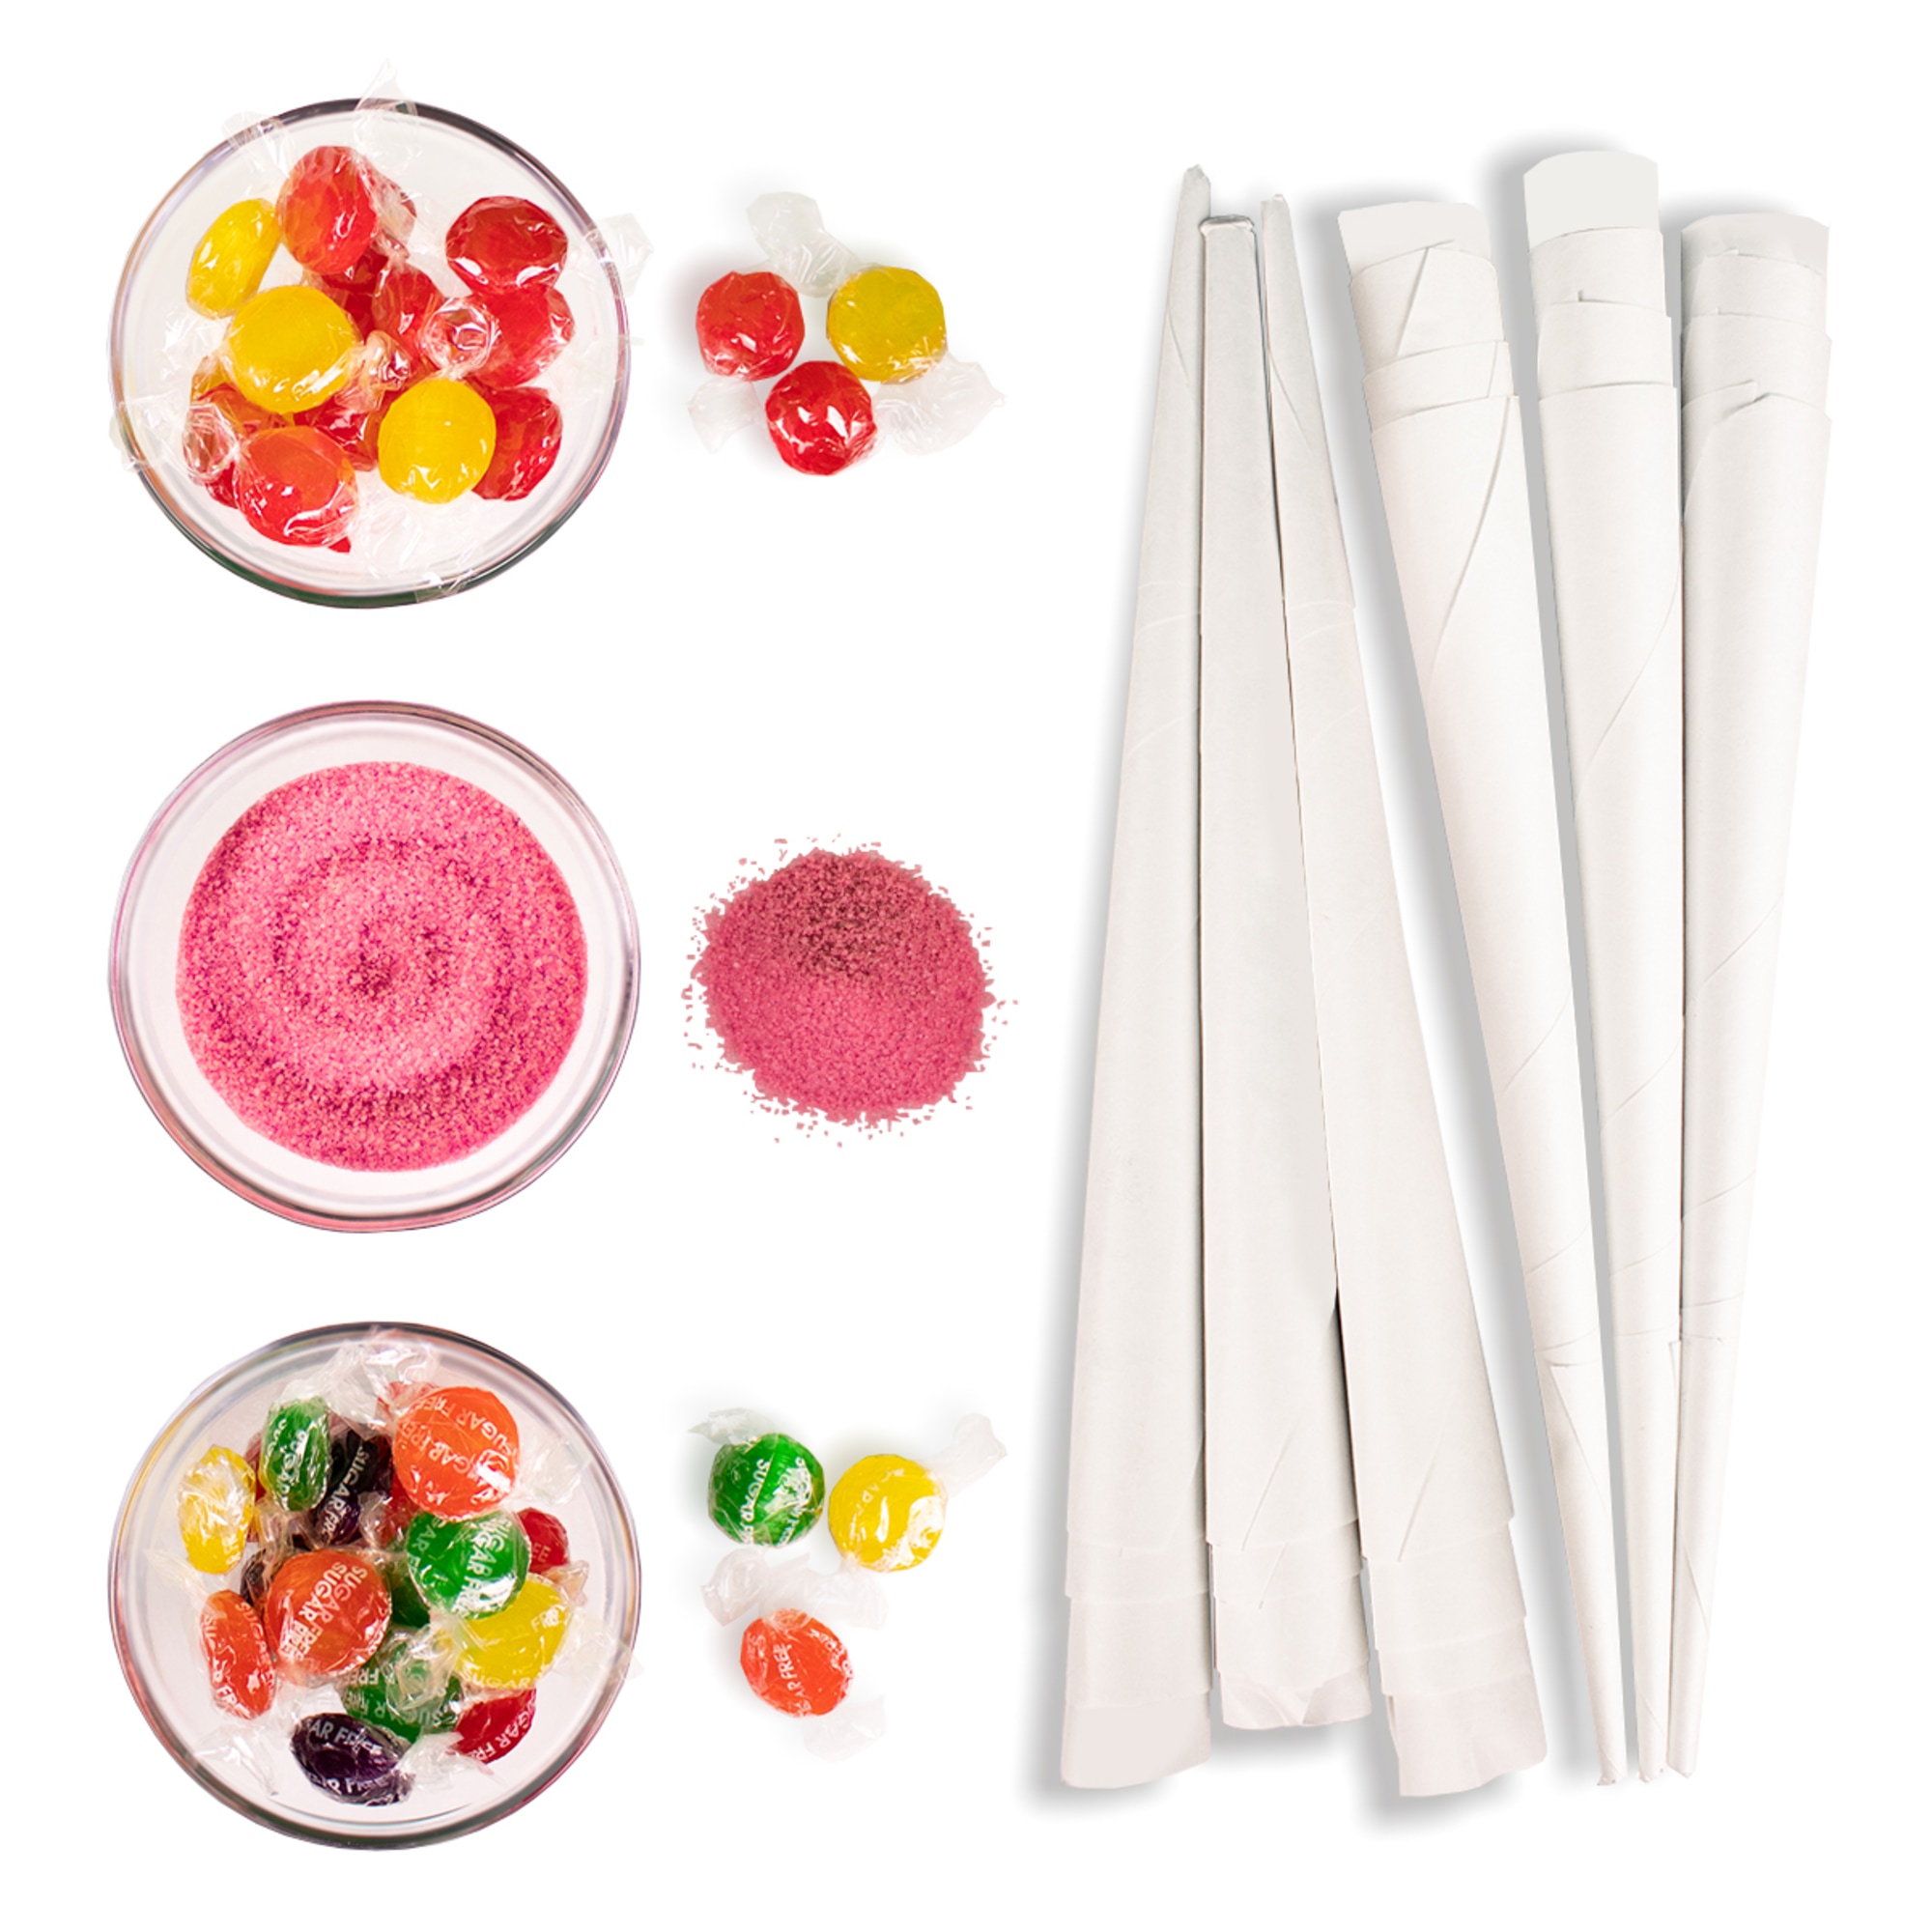 Nostalgia HCK800 Hard & Sugar-Free Candy Cotton Candy Party Kit, 60 Candies, Flossing Sugar, 24 Paper Cones - image 3 of 3